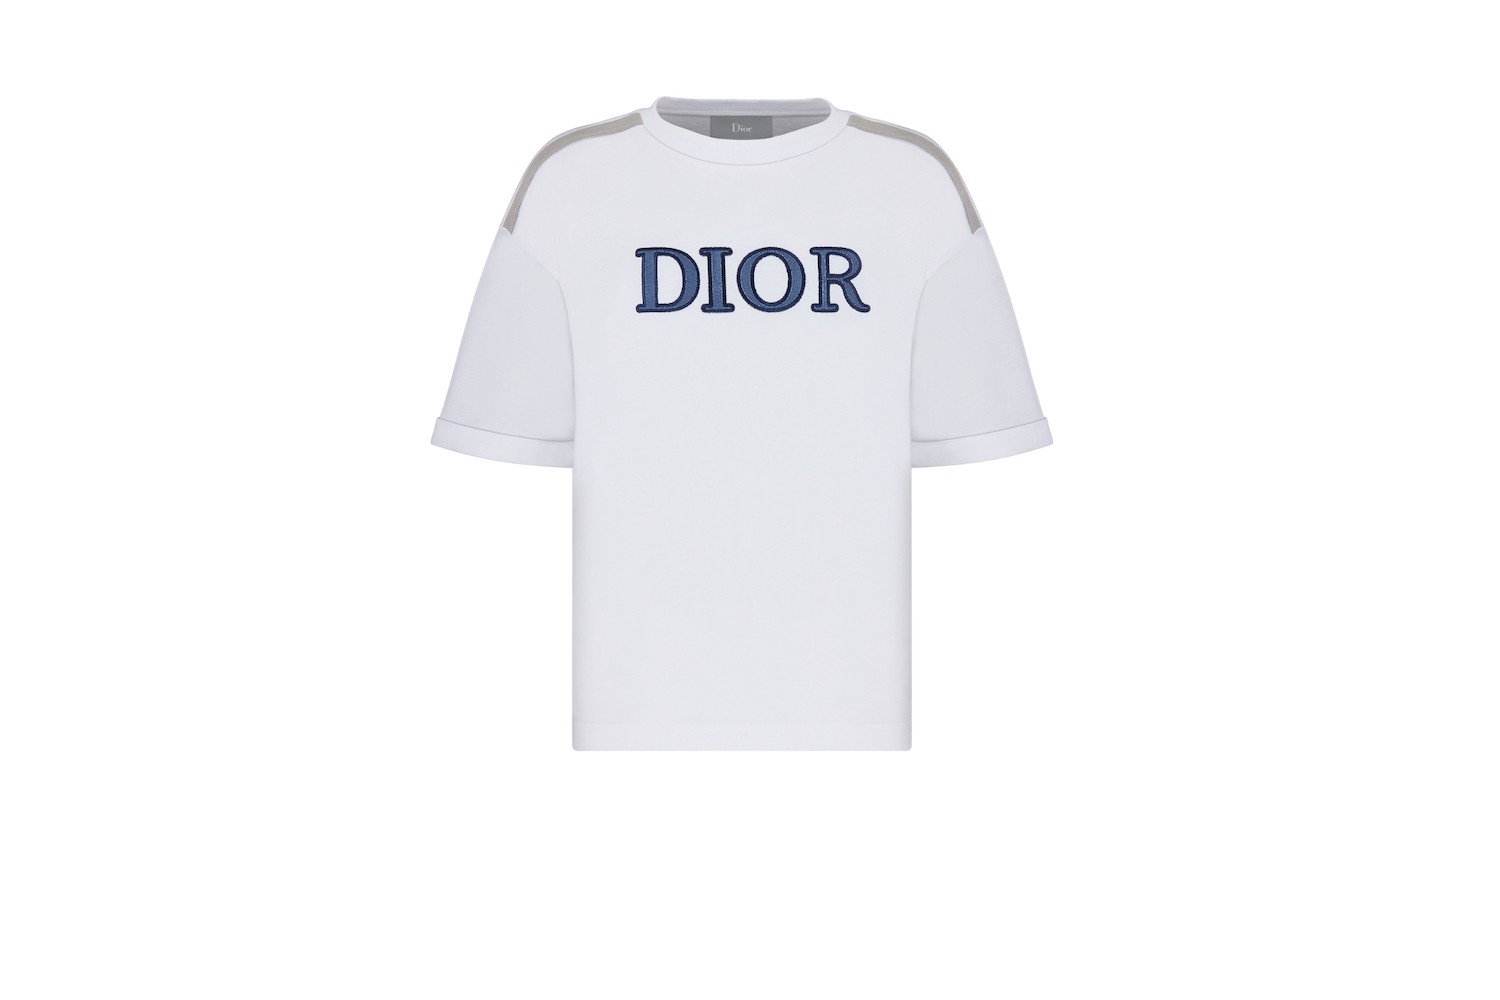  Dior kids boy's T-shirt for Fall/Winter 2021. Image courtesy of Dior.